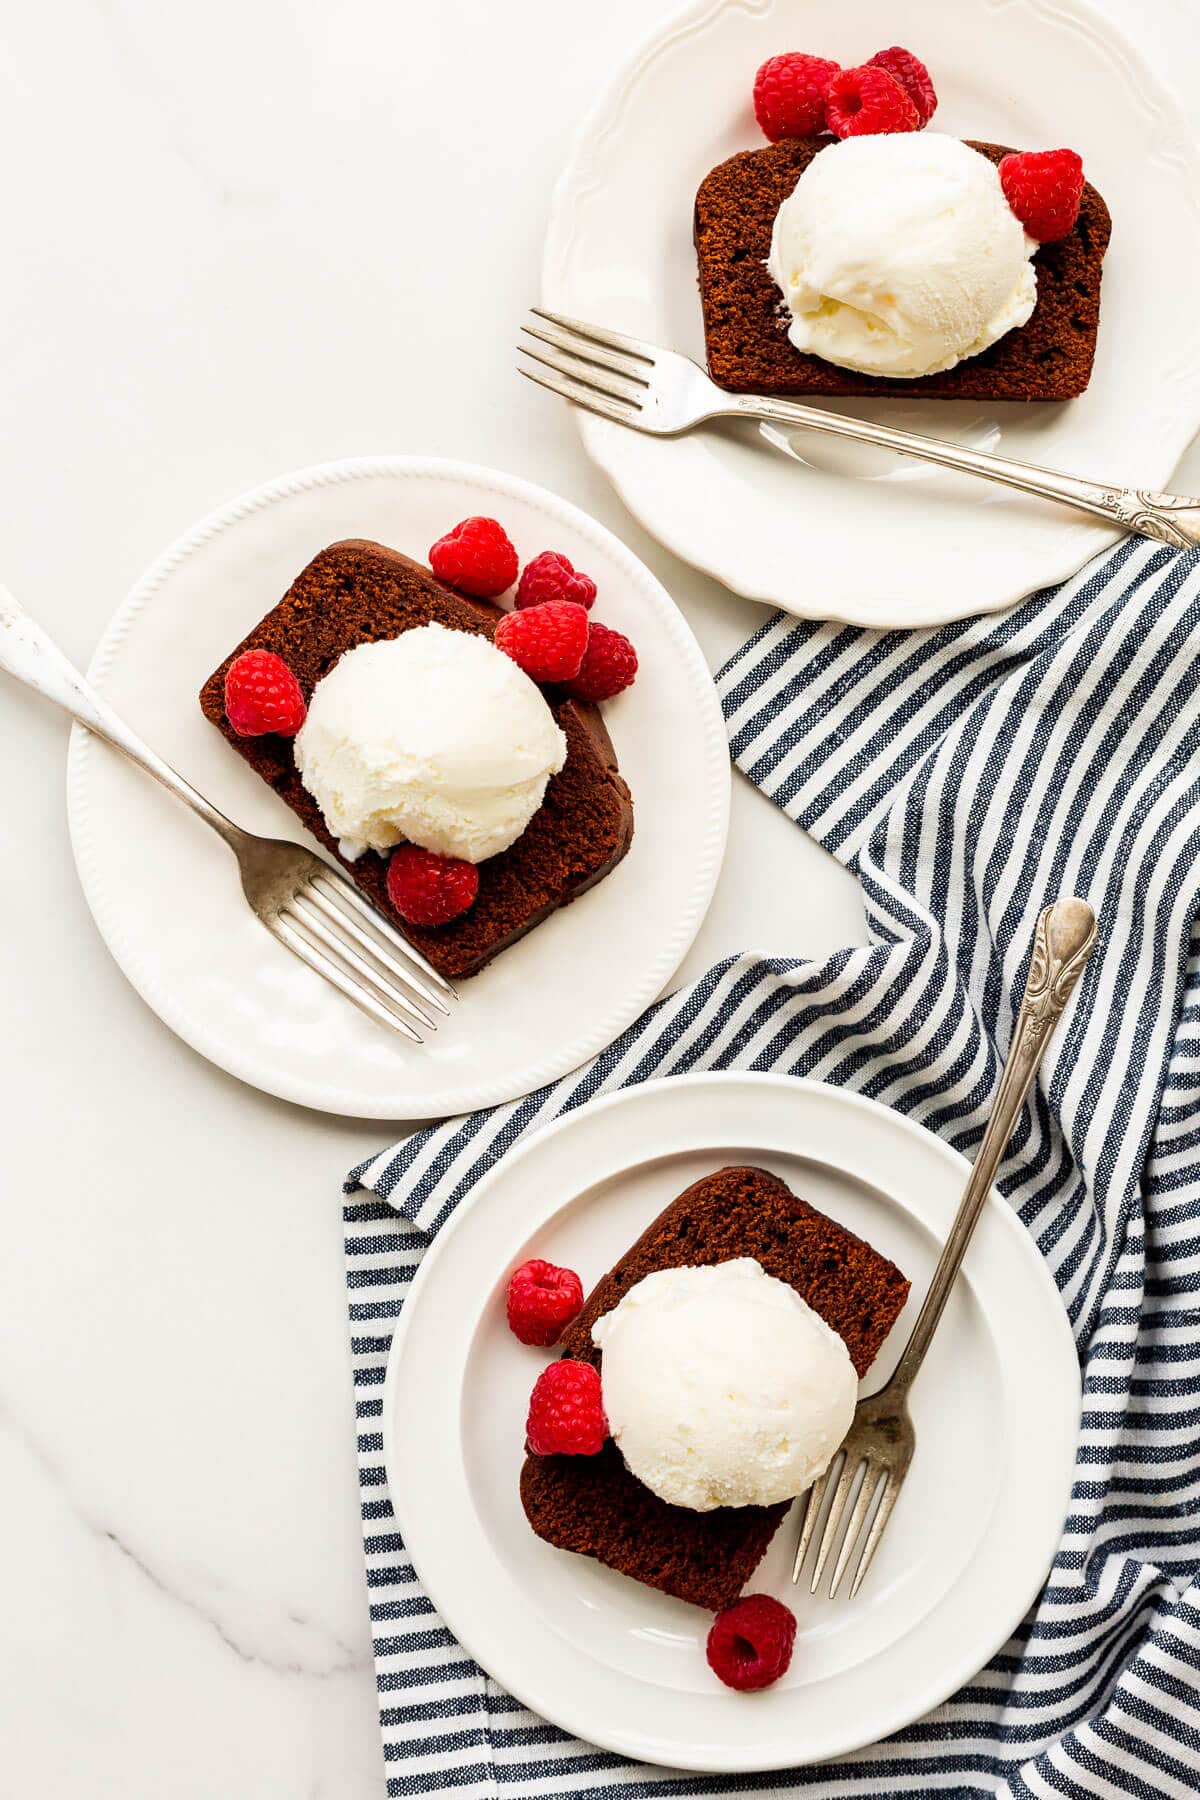 Slice of chocolate loaf cake with a scoop of ice cream and fresh raspberries on a plate with a fork, with a striped linen tucked underneath.